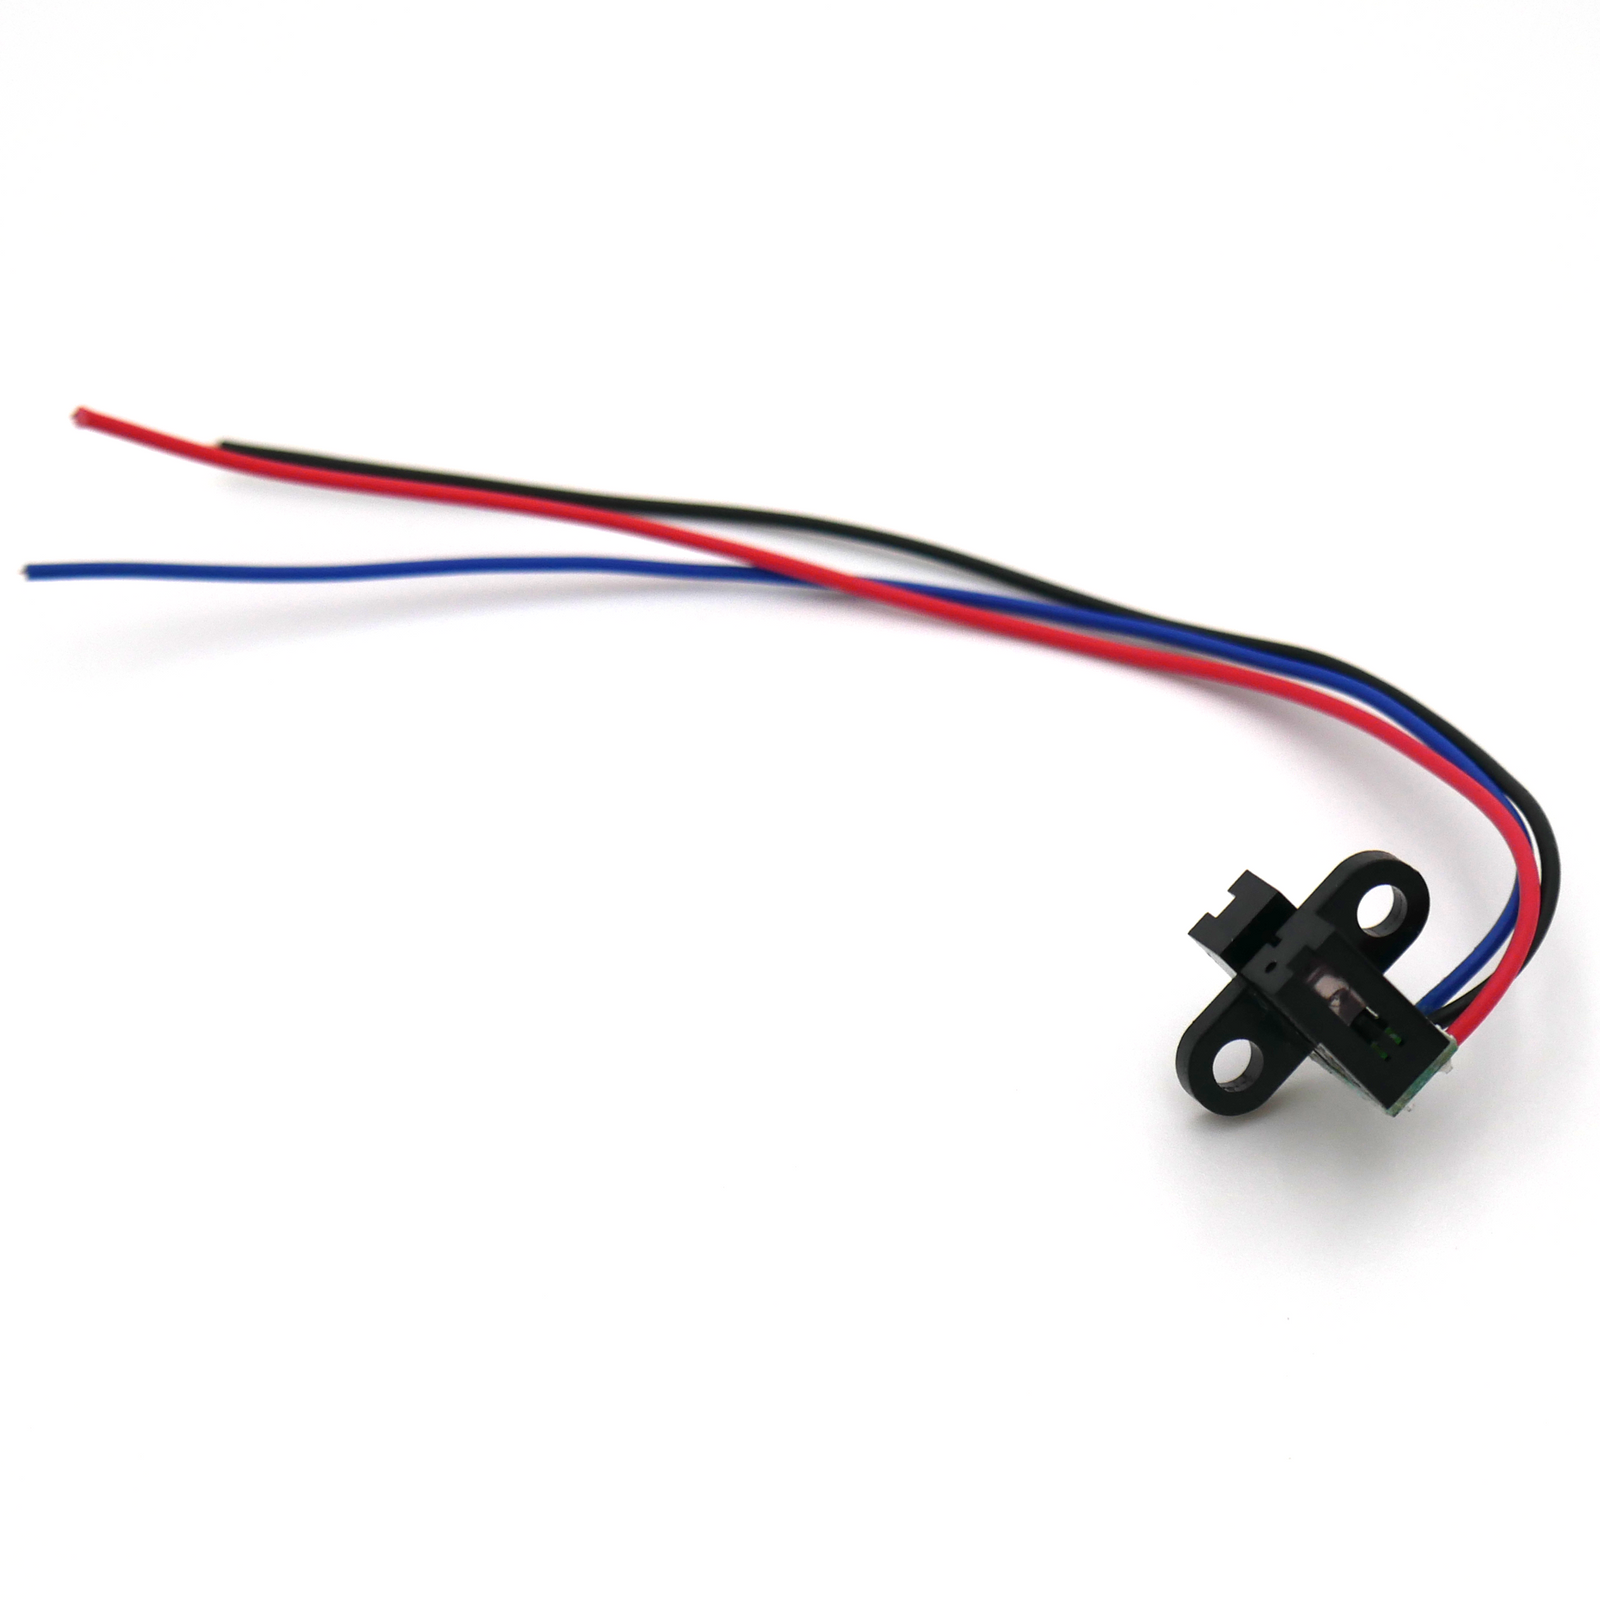 Coding position sensor with red, black and blue cables. The Coding Position Sensor can be found on Continuous Band Sealer machines which use Hot Roll Coding systems.